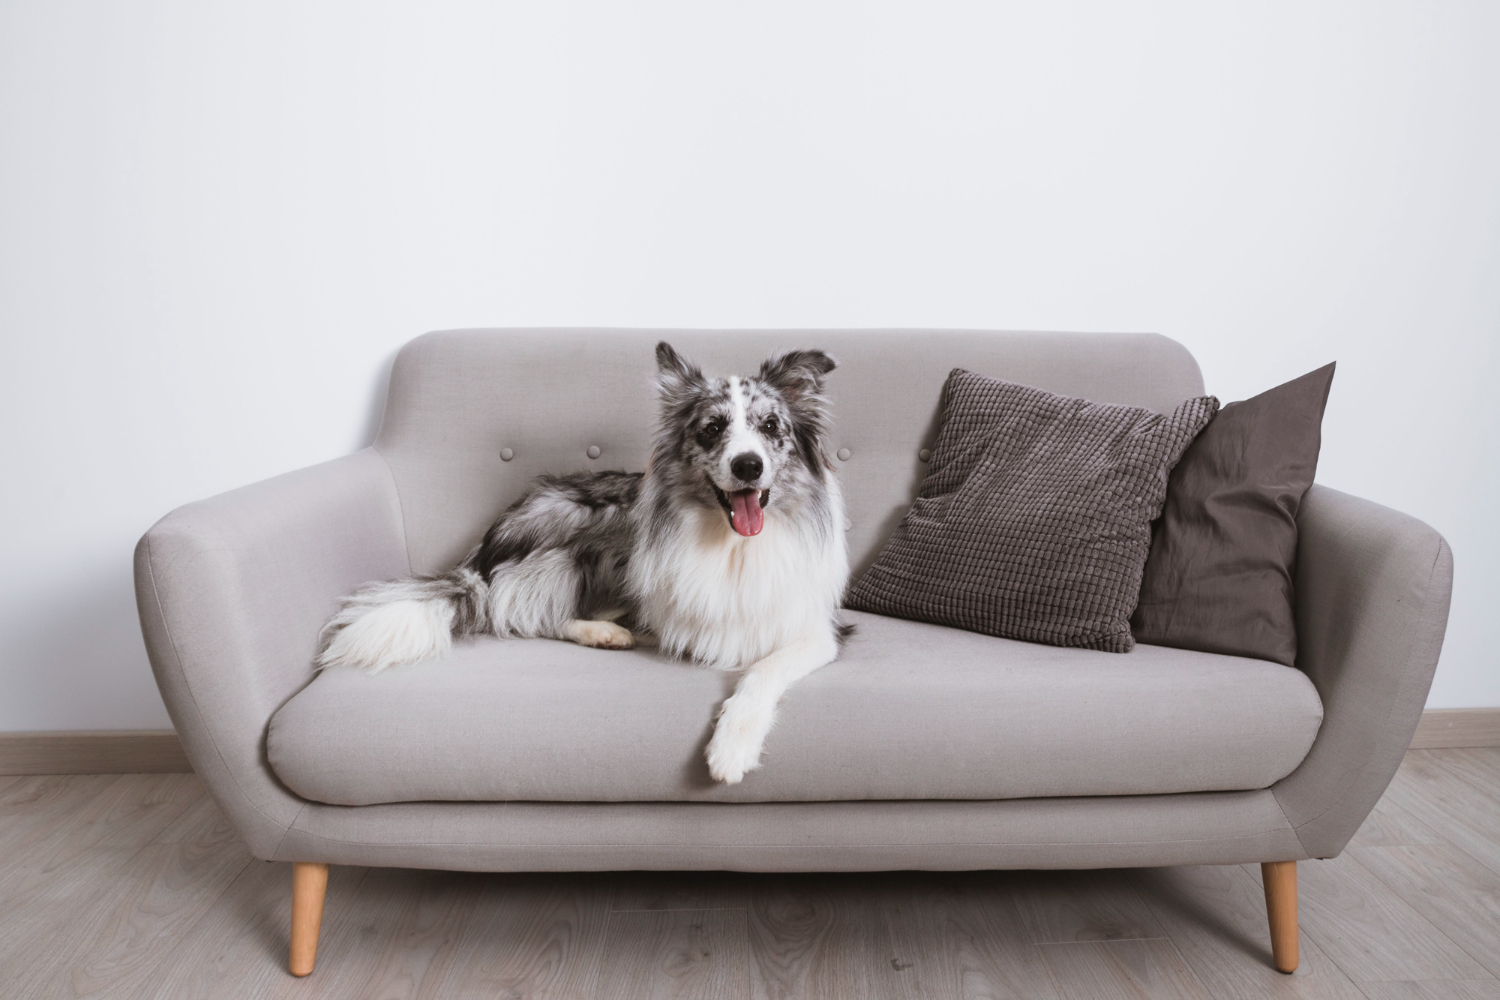 Apartment Living With Pets: Keeping Your Furniture in Good Shape